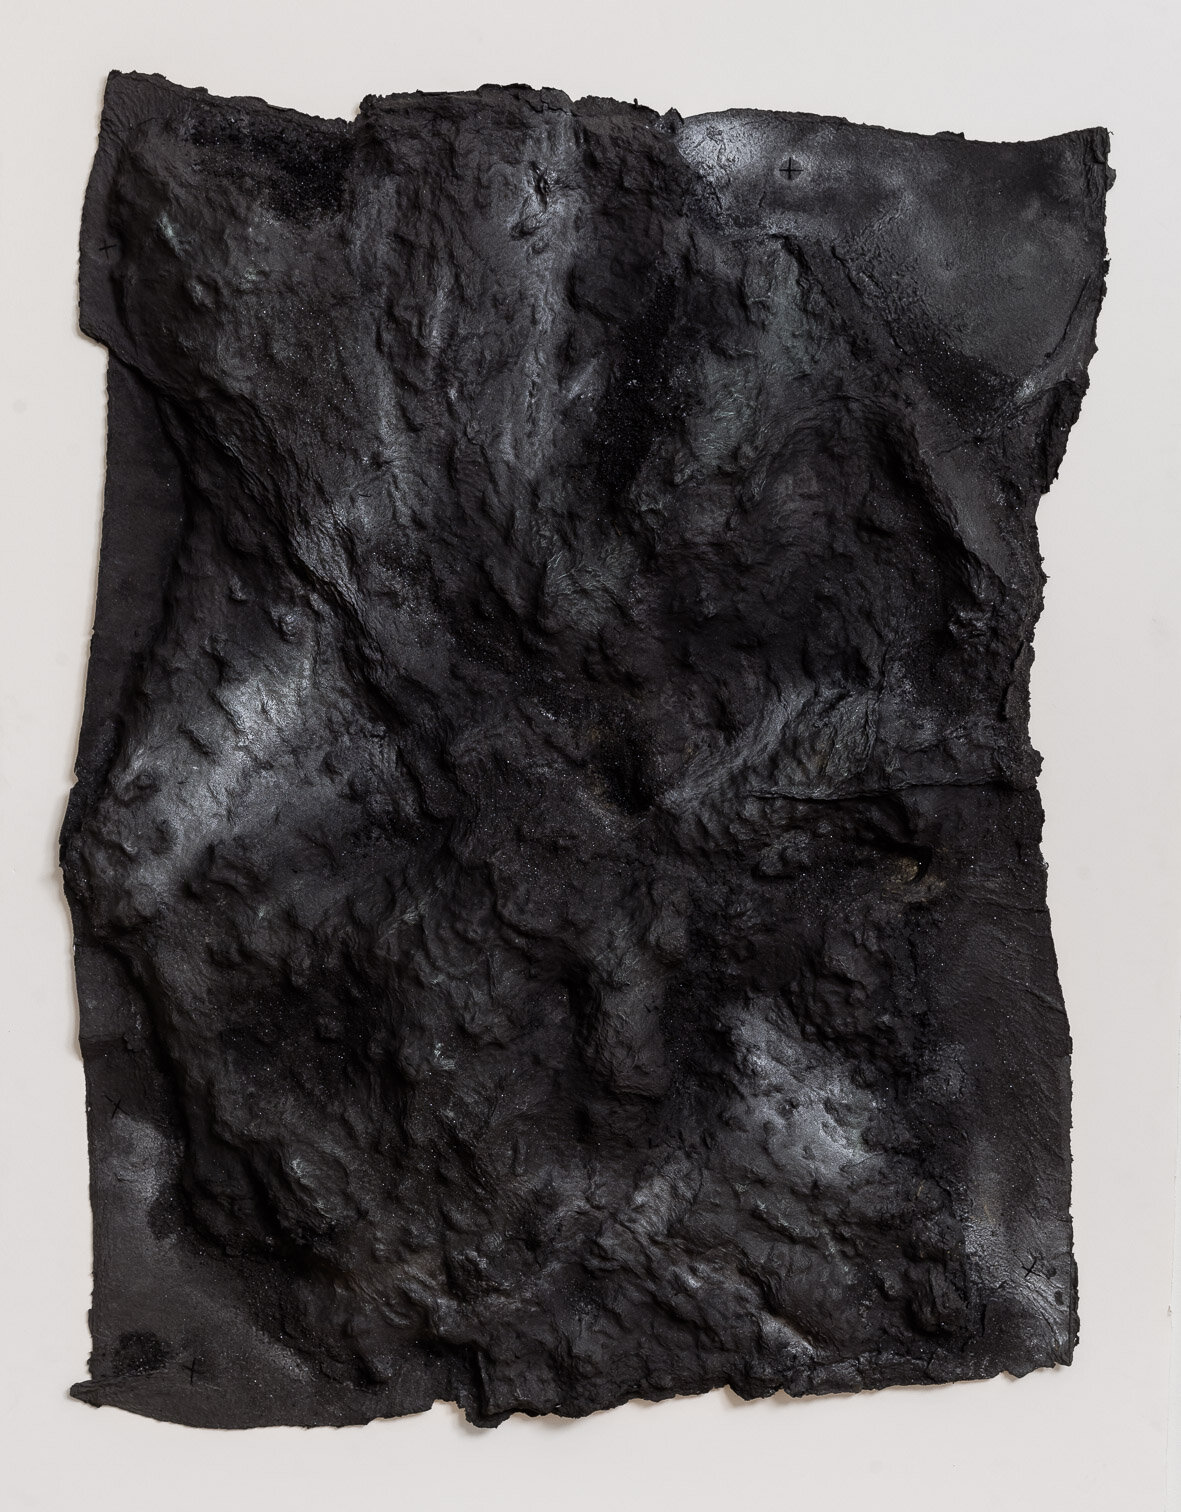   Blane De St. Croix   Lava Bed, Kilauea 2 , 2015. Paper and metal powders. 40 x 32 x 3 inches. Image credit: Etienne Frossard. 